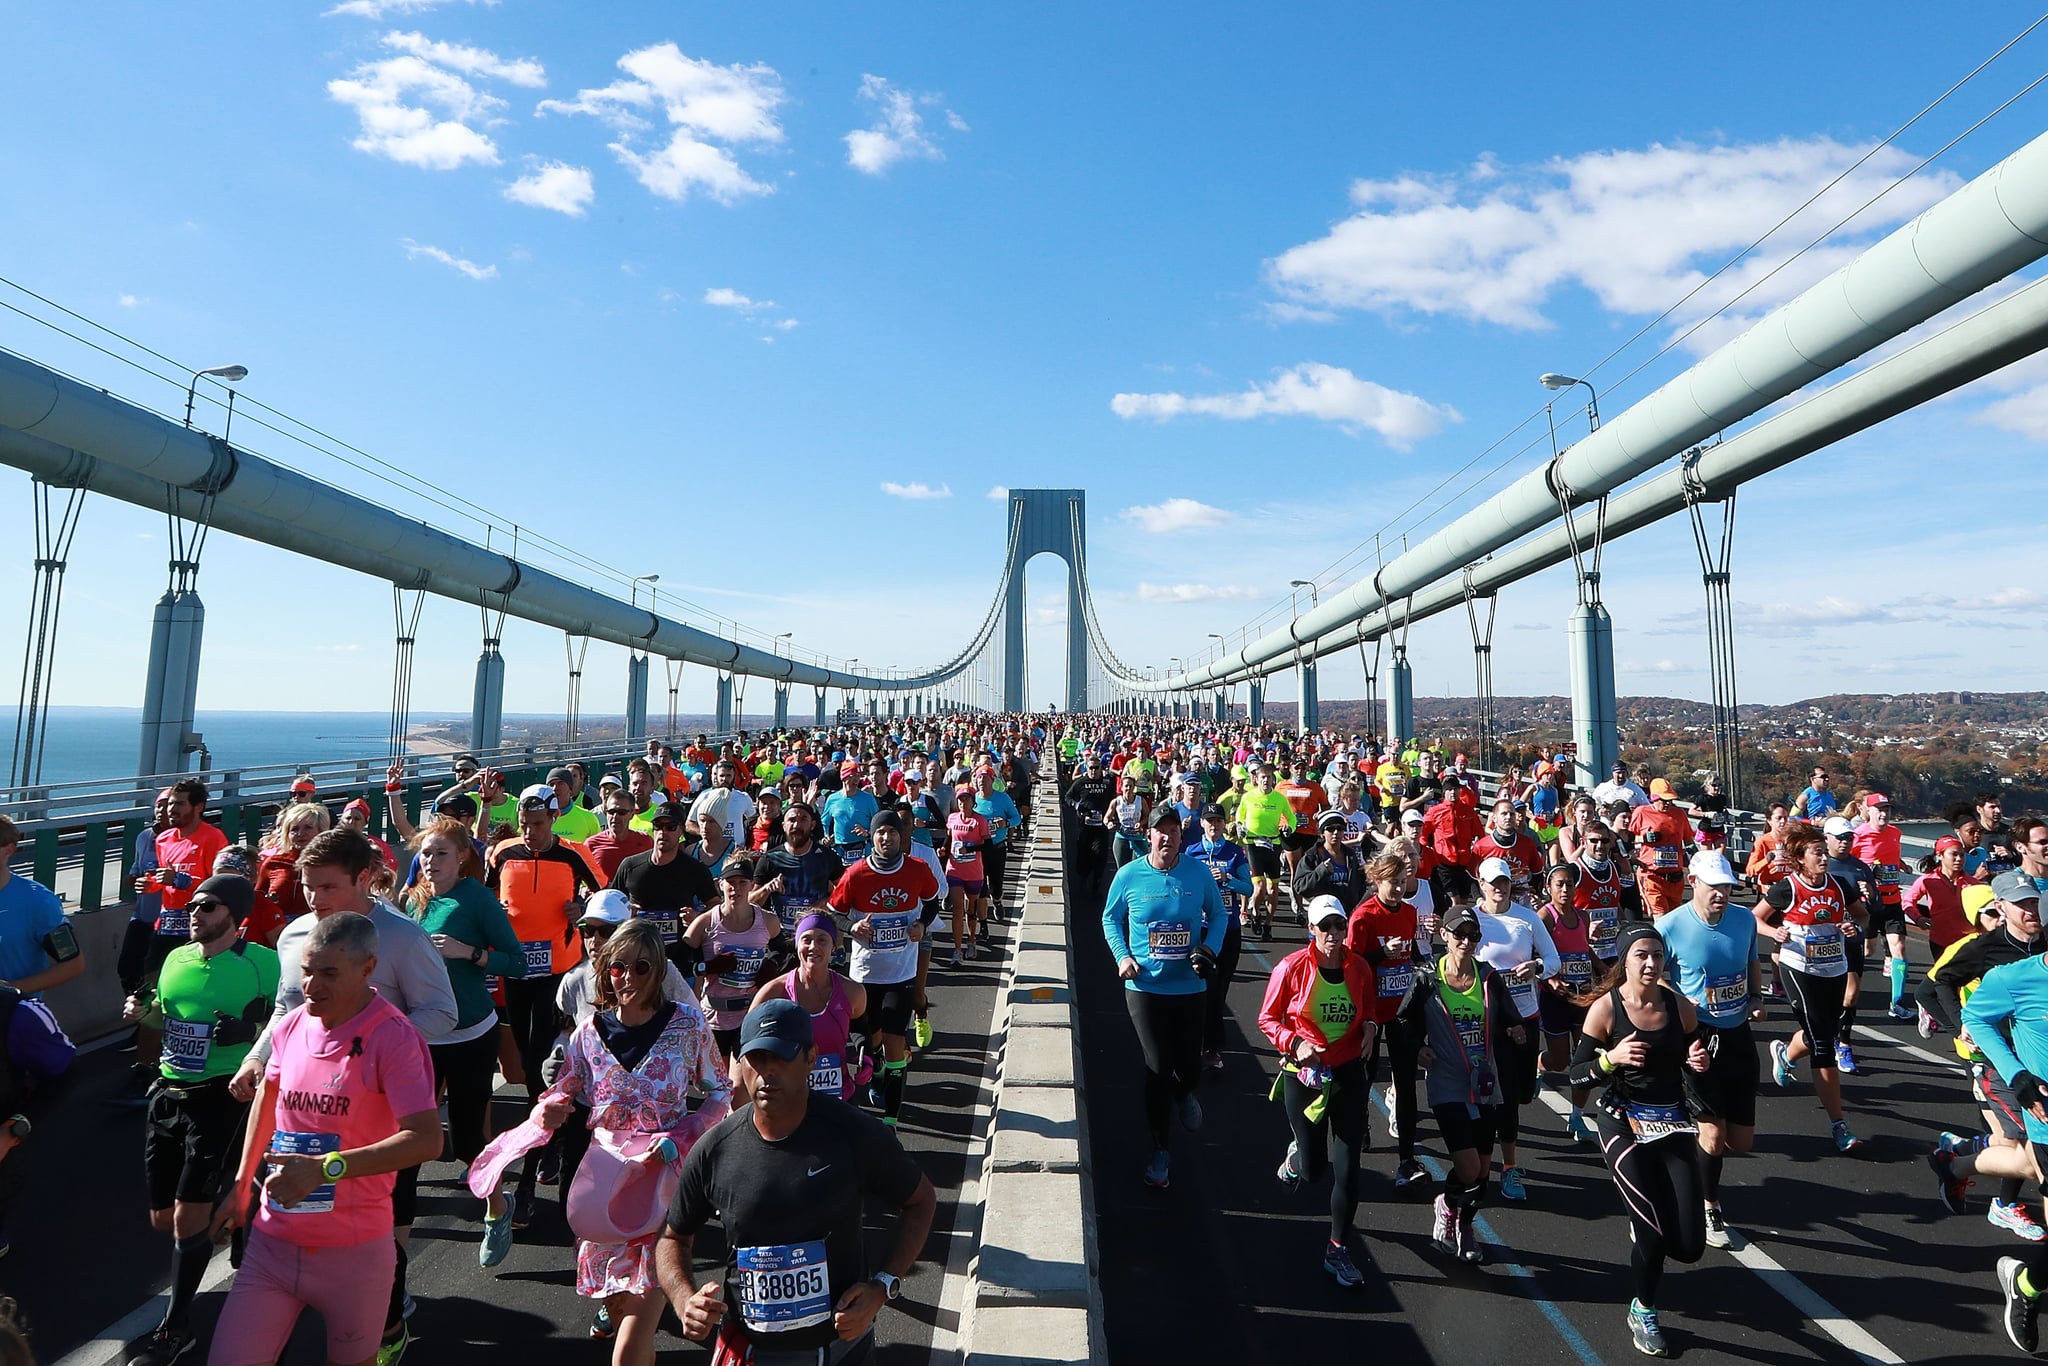 NEW YORK, NY - NOVEMBER 06:  Runners cross the Verrazano-Narrows Bridge at the start of the 2016 TCS New York City Marathon on November 6, 2016 in the Brooklyn borough of New York City.  (Photo by Michael Reaves/Getty Images)